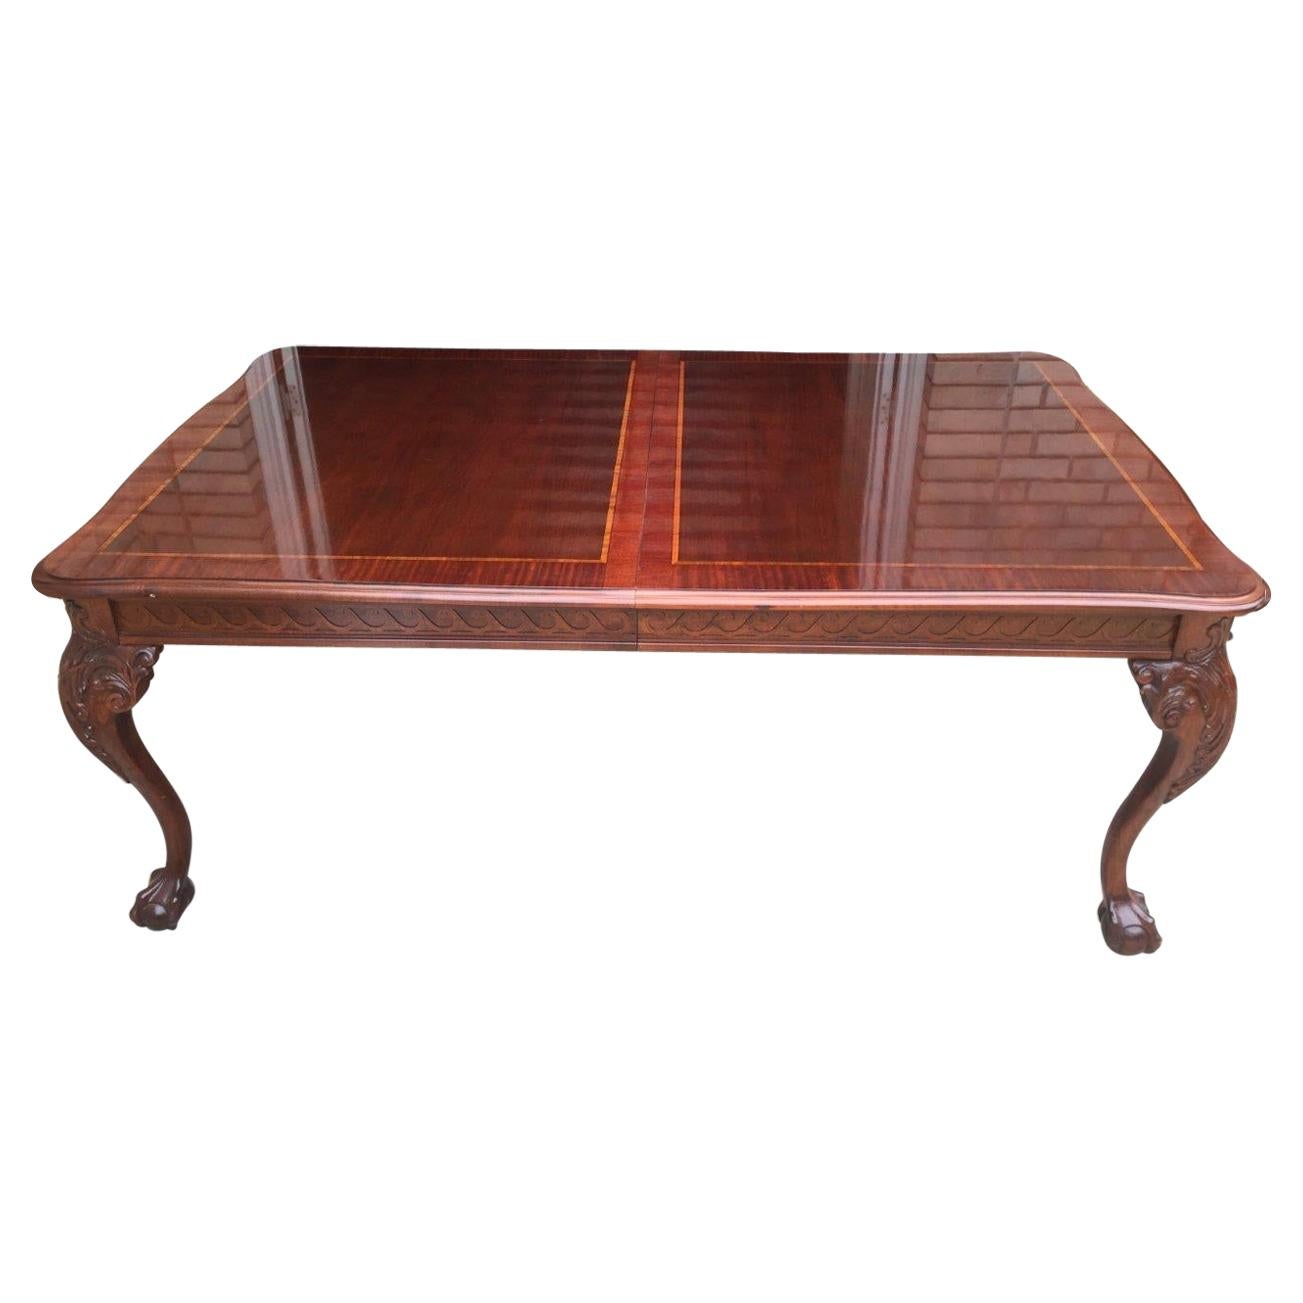 Magnificent English Chippendale Style Dining Table